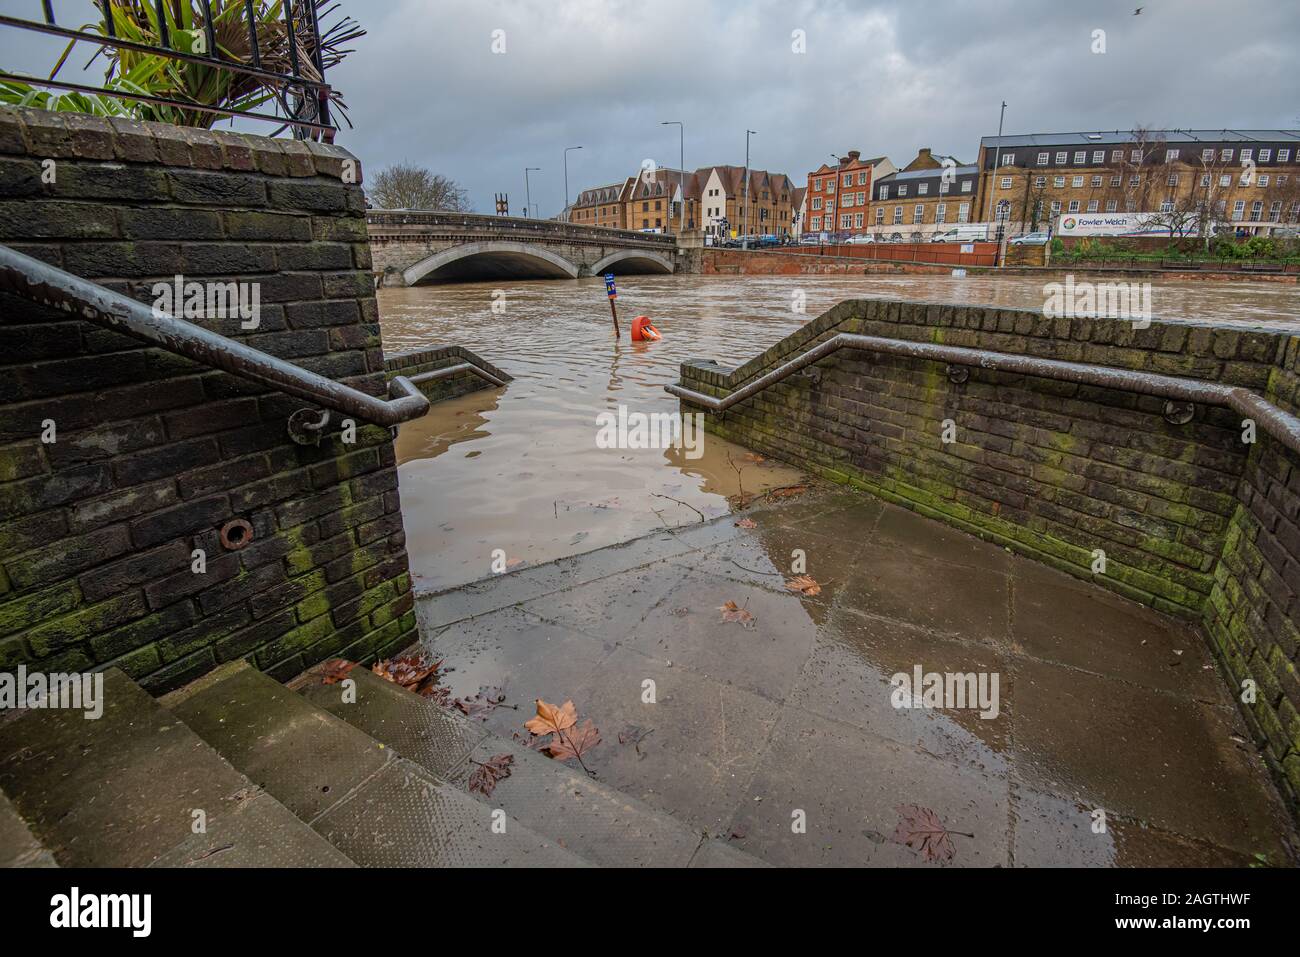 Maidstone, Kent, England - Dec 21 2019: City centre, Broadway bridge during the flood of the Medway river Stock Photo